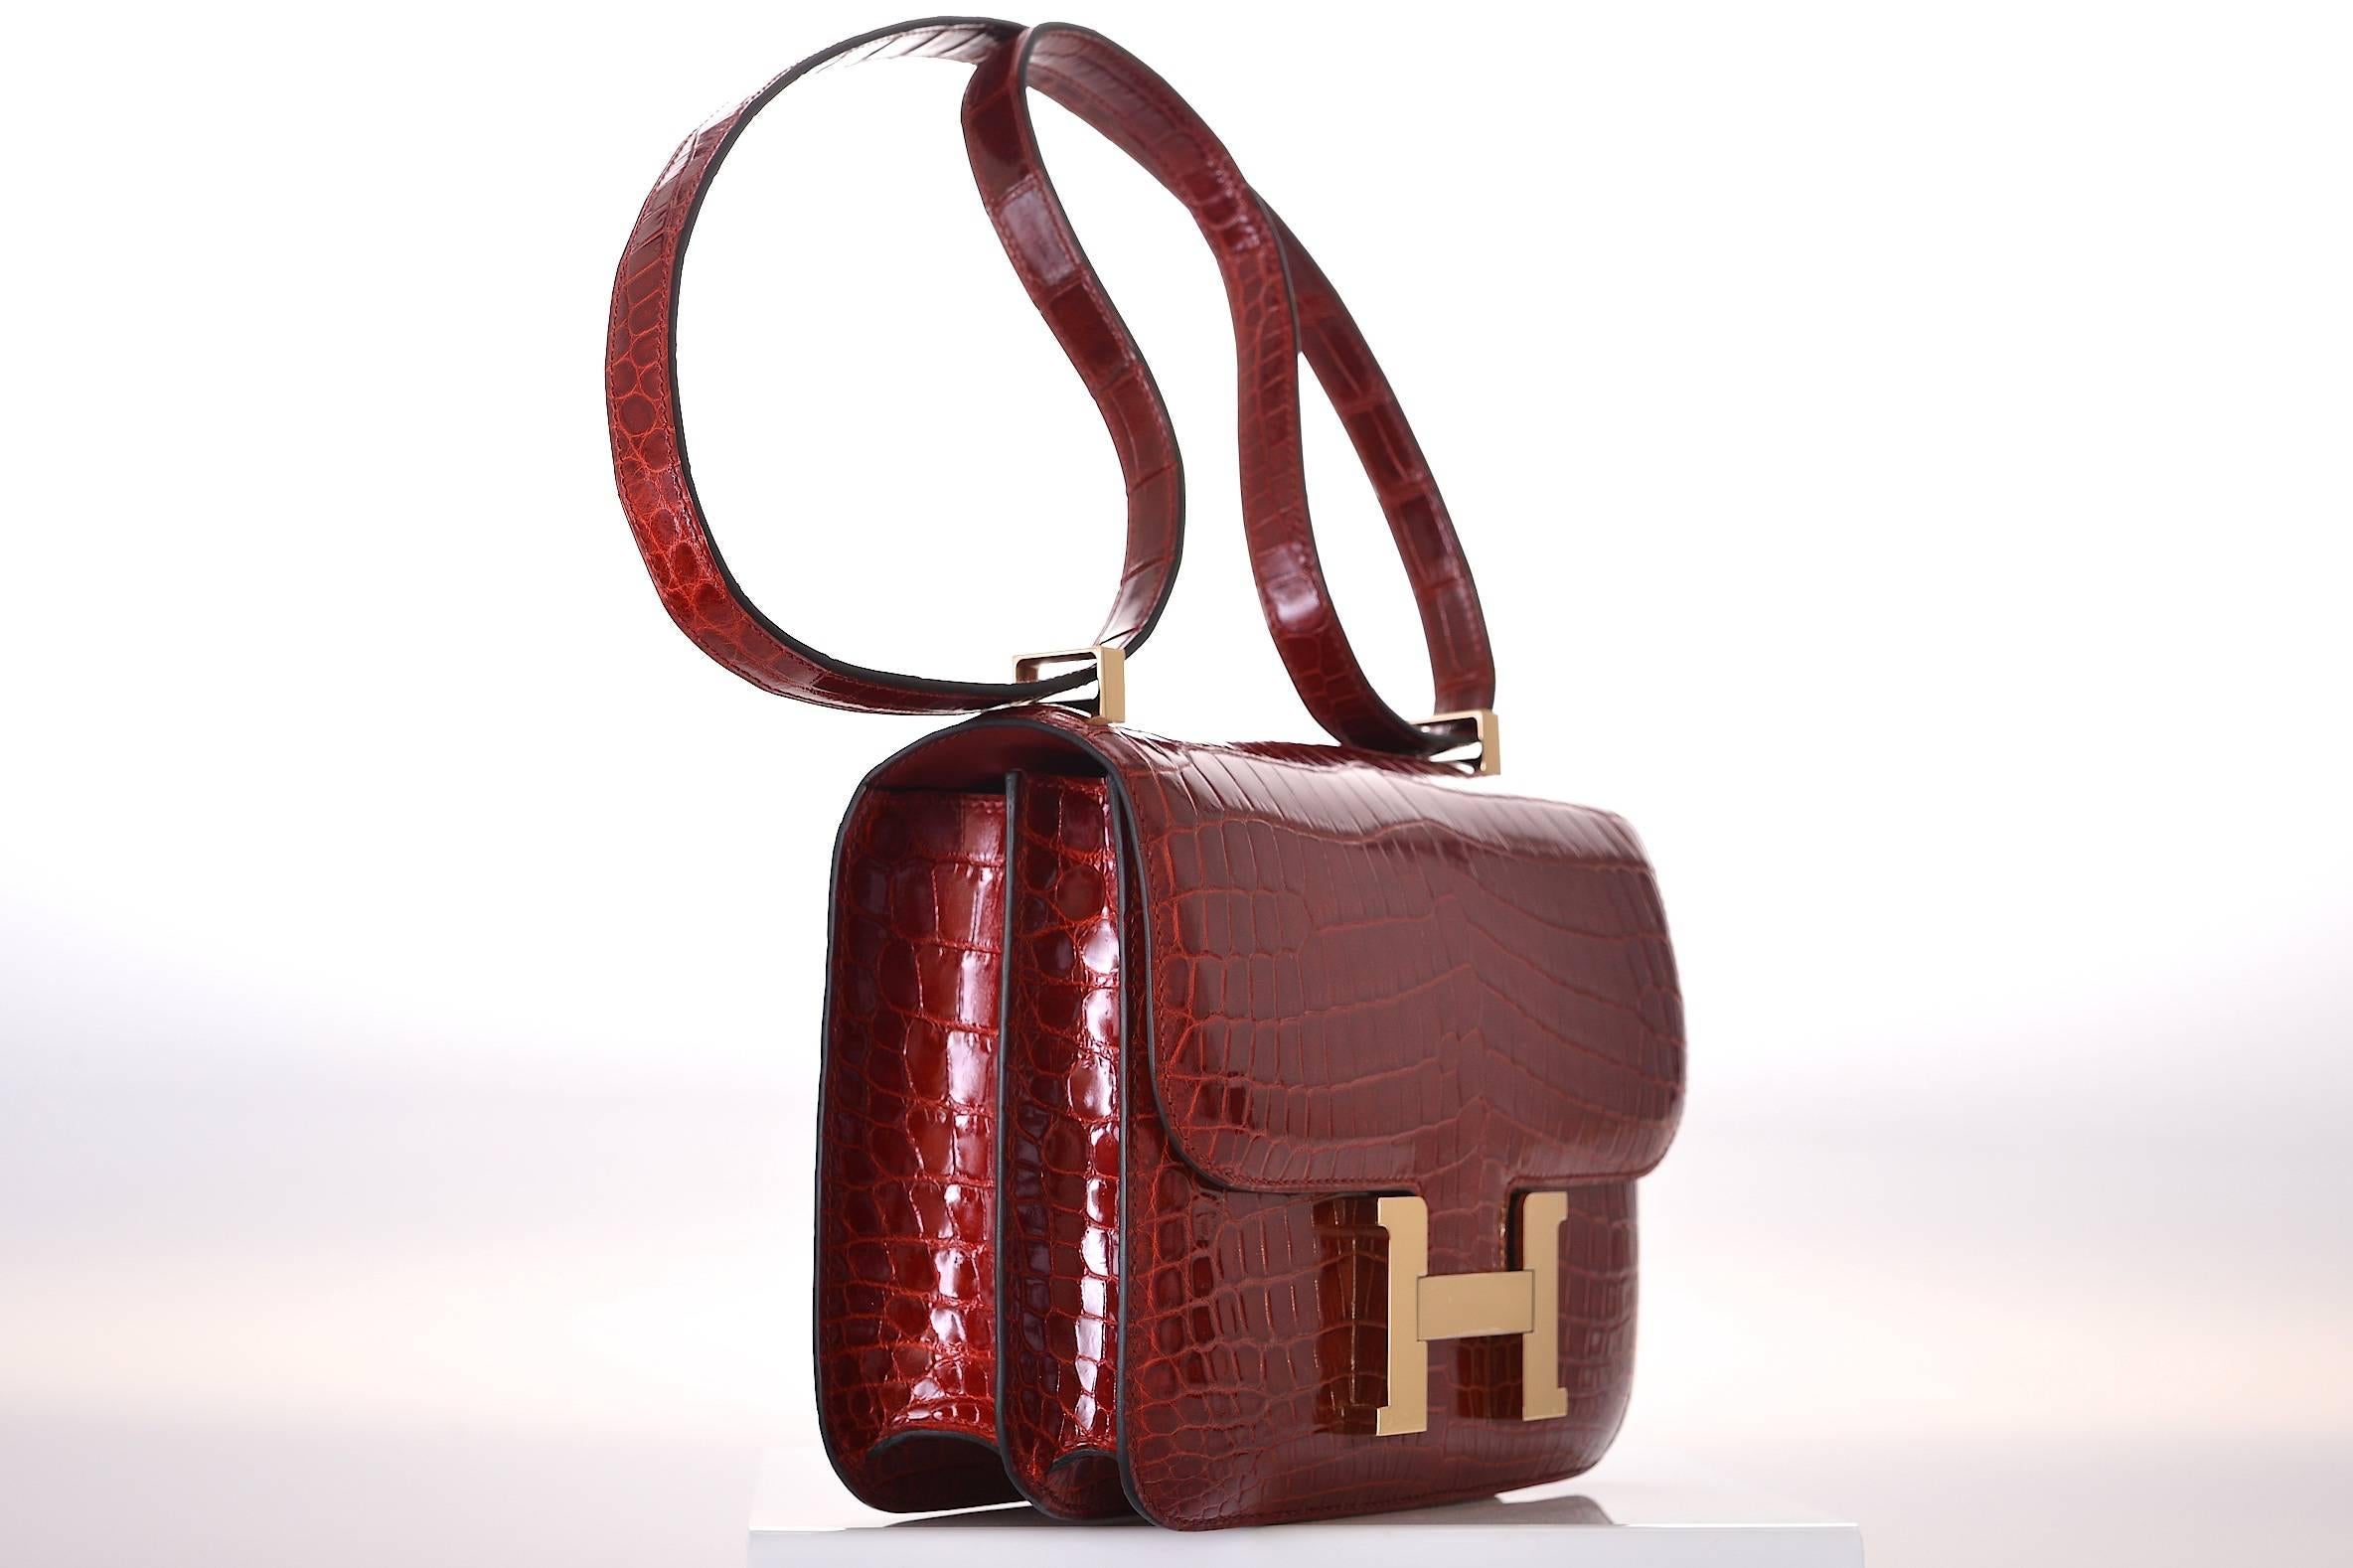 New Condition

Hermes Constance in a perfect super rare size 24cm! Incredible Rouge H nilo crocodile with Gold hardware. Actually big enough for everyday use. Comfy double strap that is perfect to carry cross body or shoulder bag. The color will